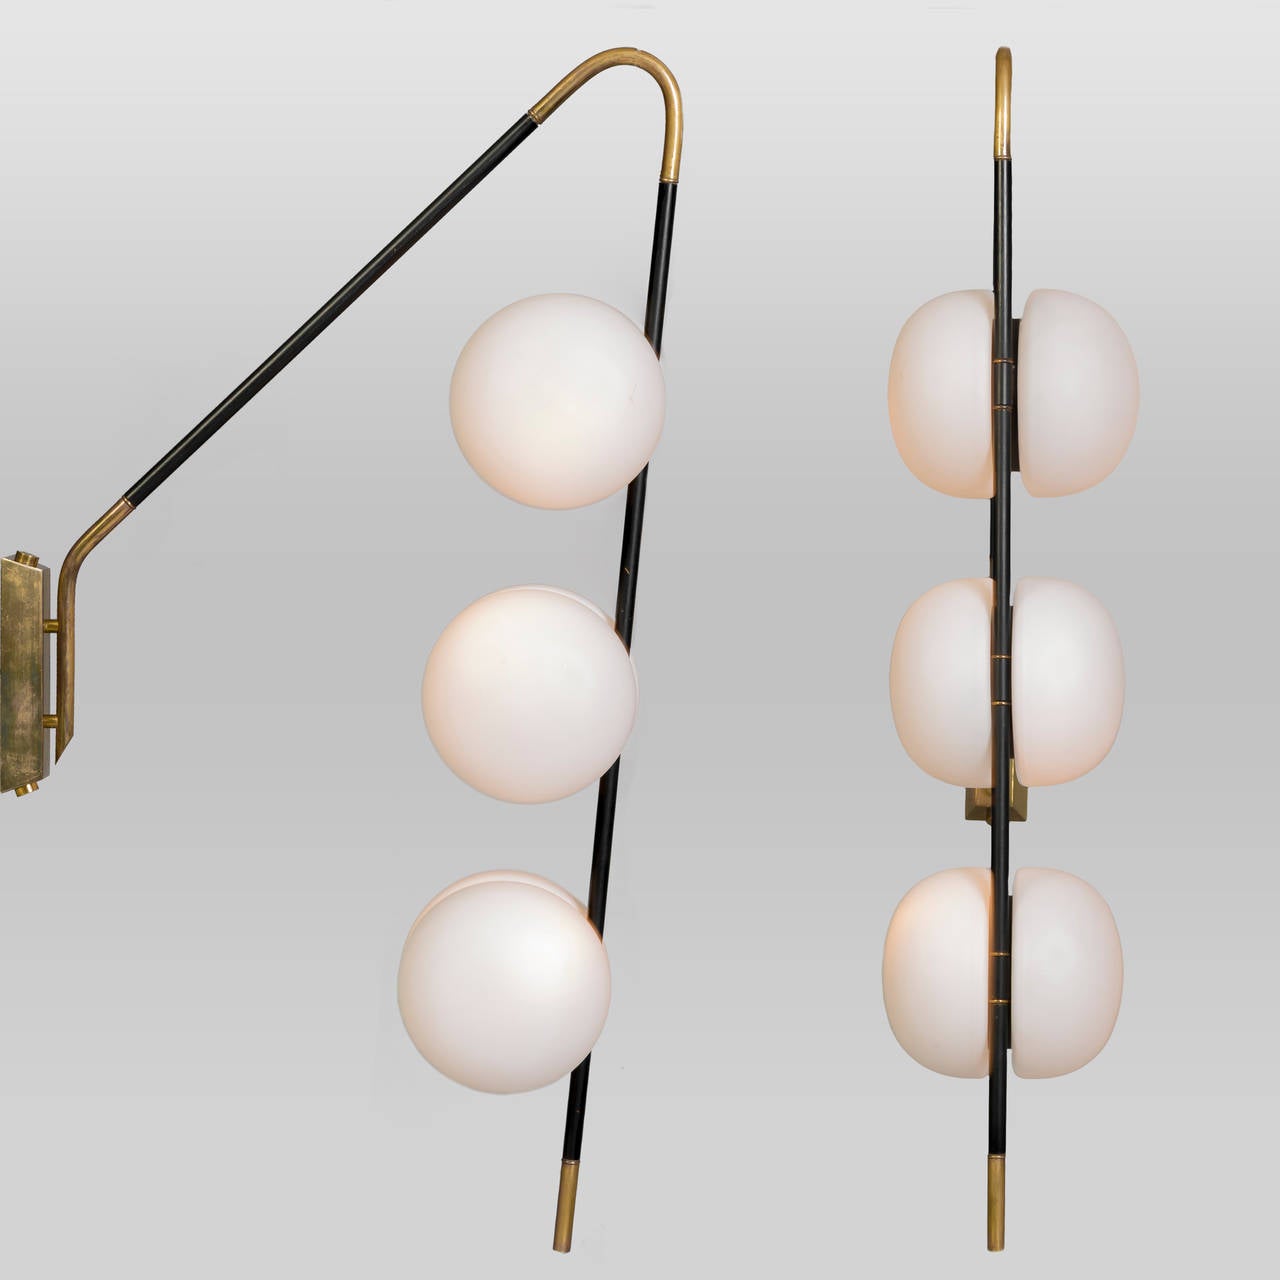 Rare pair of Lunel wall lights with their original opaline globe glass shades by Lunel Lumiere, French, circa 1950.

The brass arms are sheathed in a black metal sleeve, and the lights have just been re-wired.